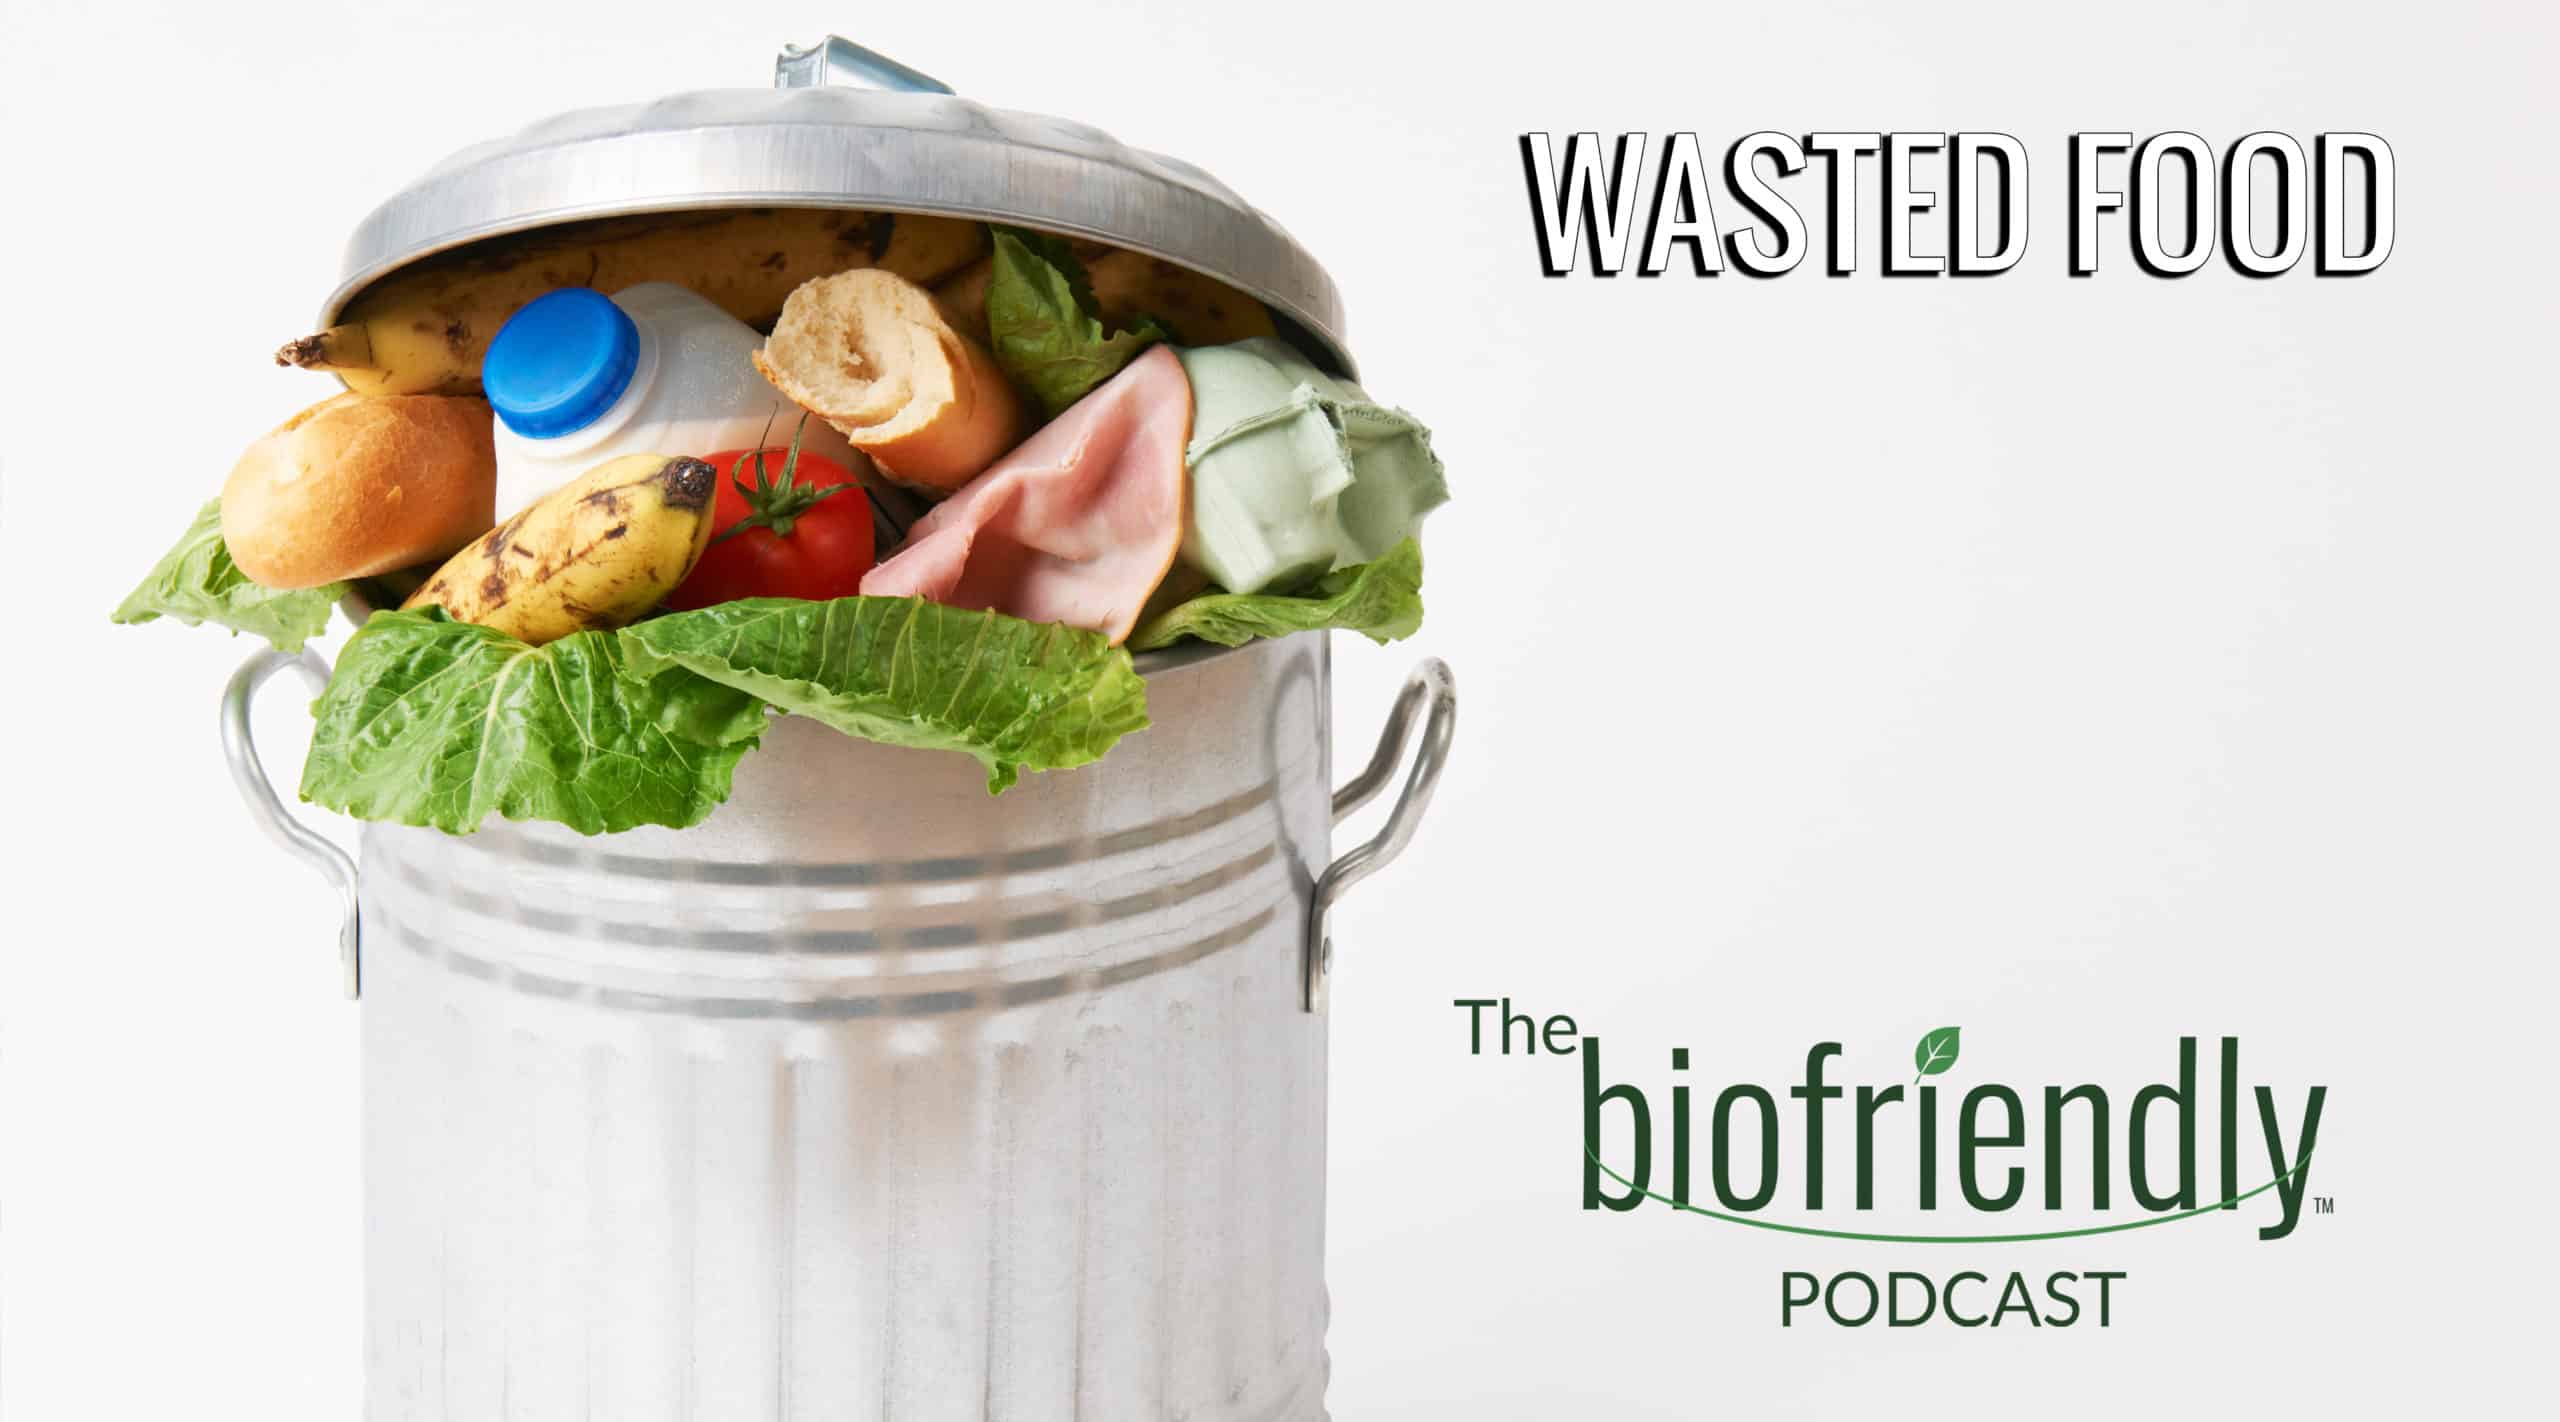 The Biofriendly Podcast - Episode 26 - Wasted Food